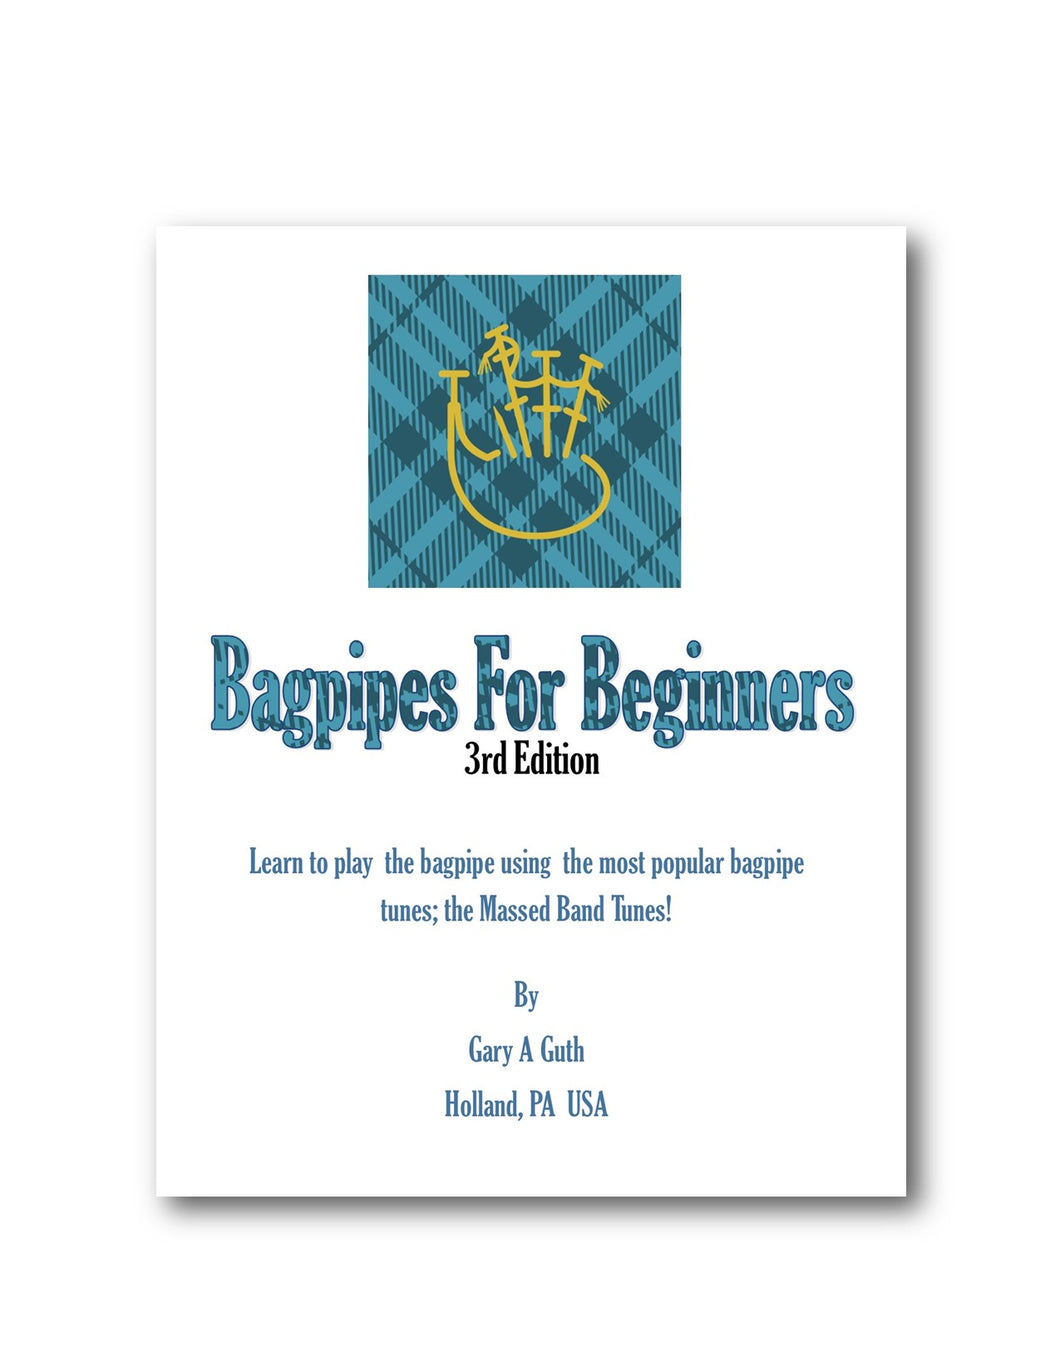 1 Tune at A Time-From Our Bagpipes For Beginners Book $5 Each With Practice Chanter Audio.